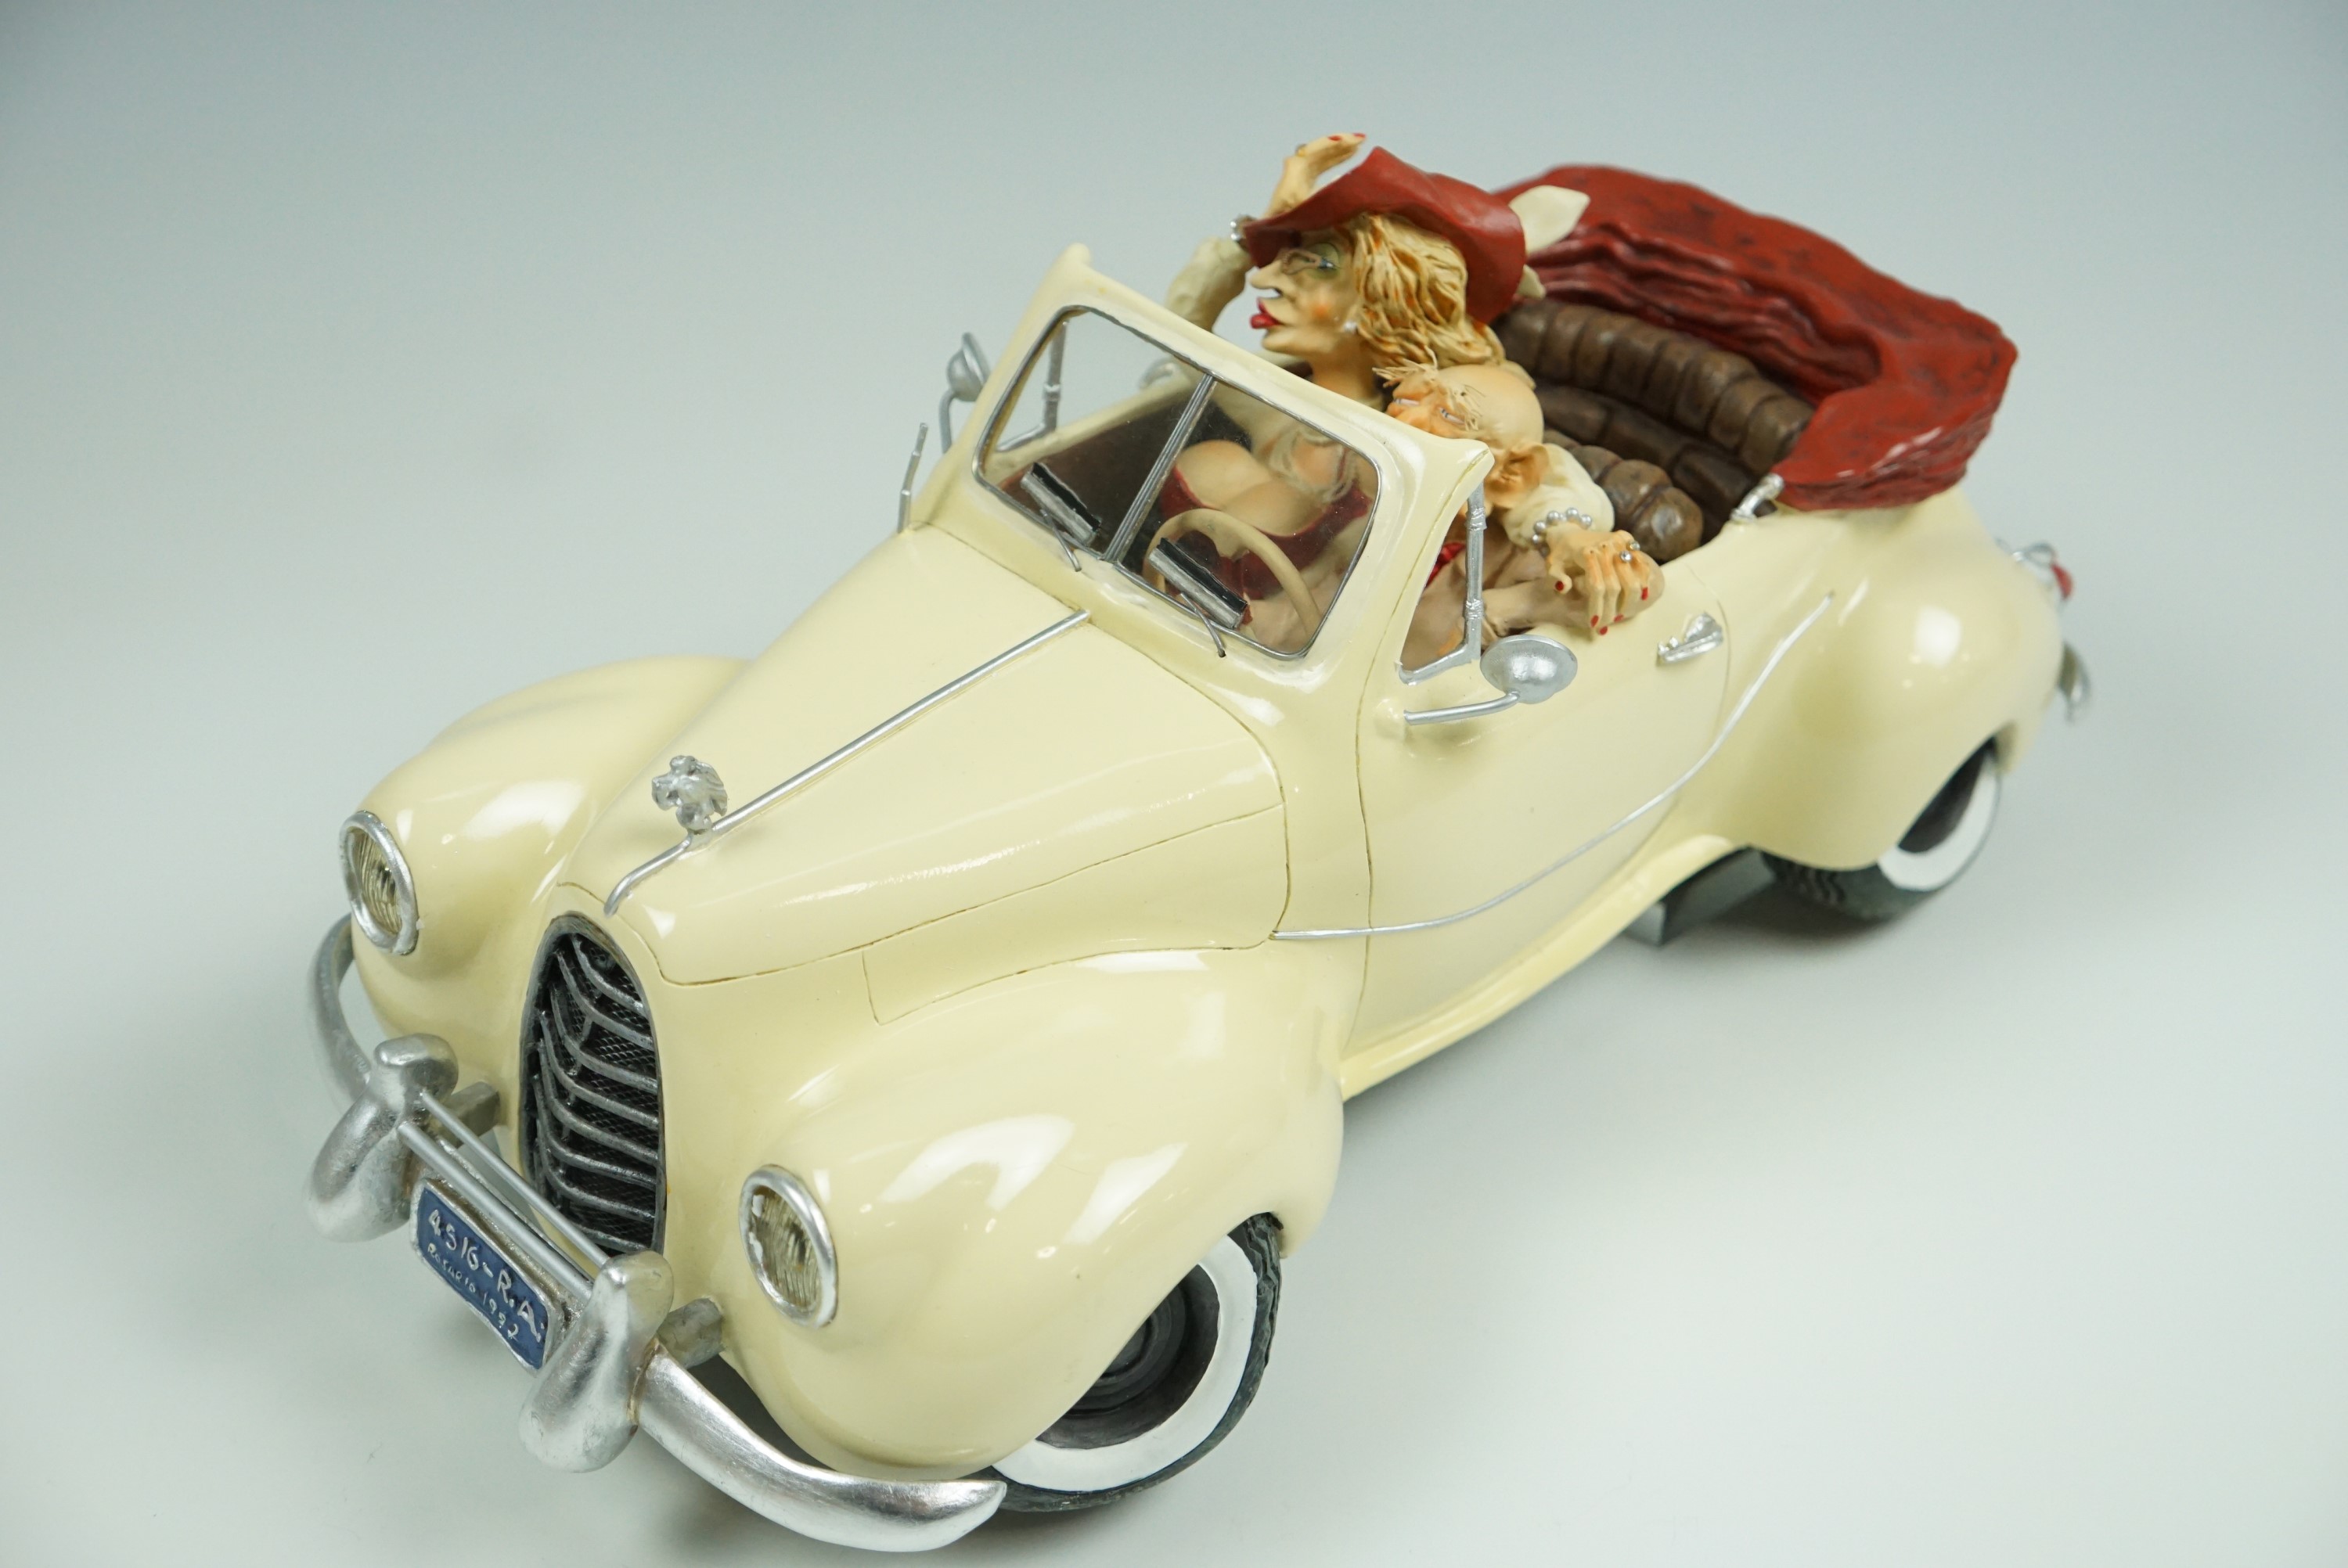 The comic art of Guillermo Forchino "Le Cabriolet", 35 cm long